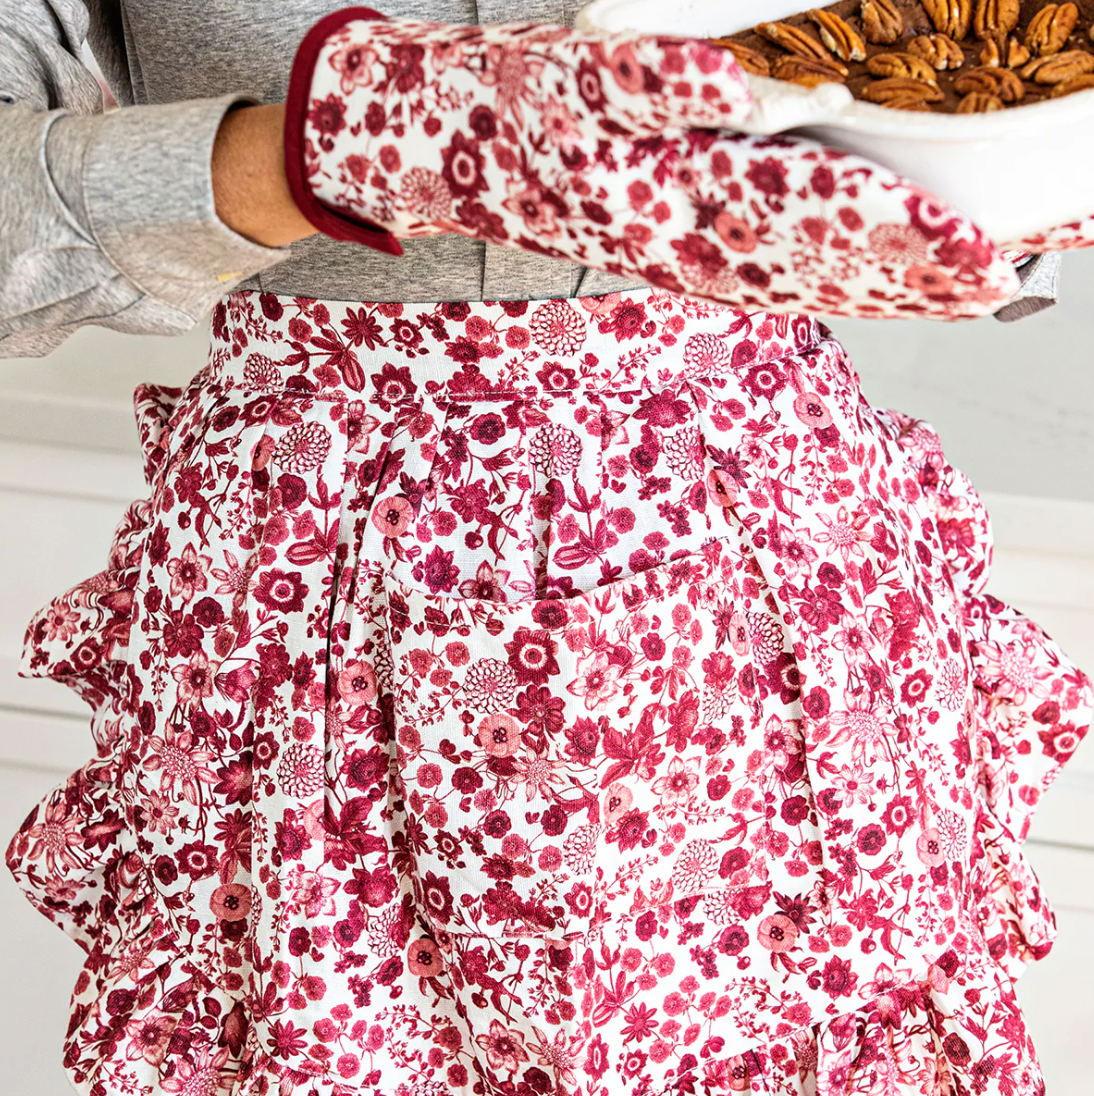 Field of Flowers Apron &amp; Oven Mitt 2pc Set - Ruby